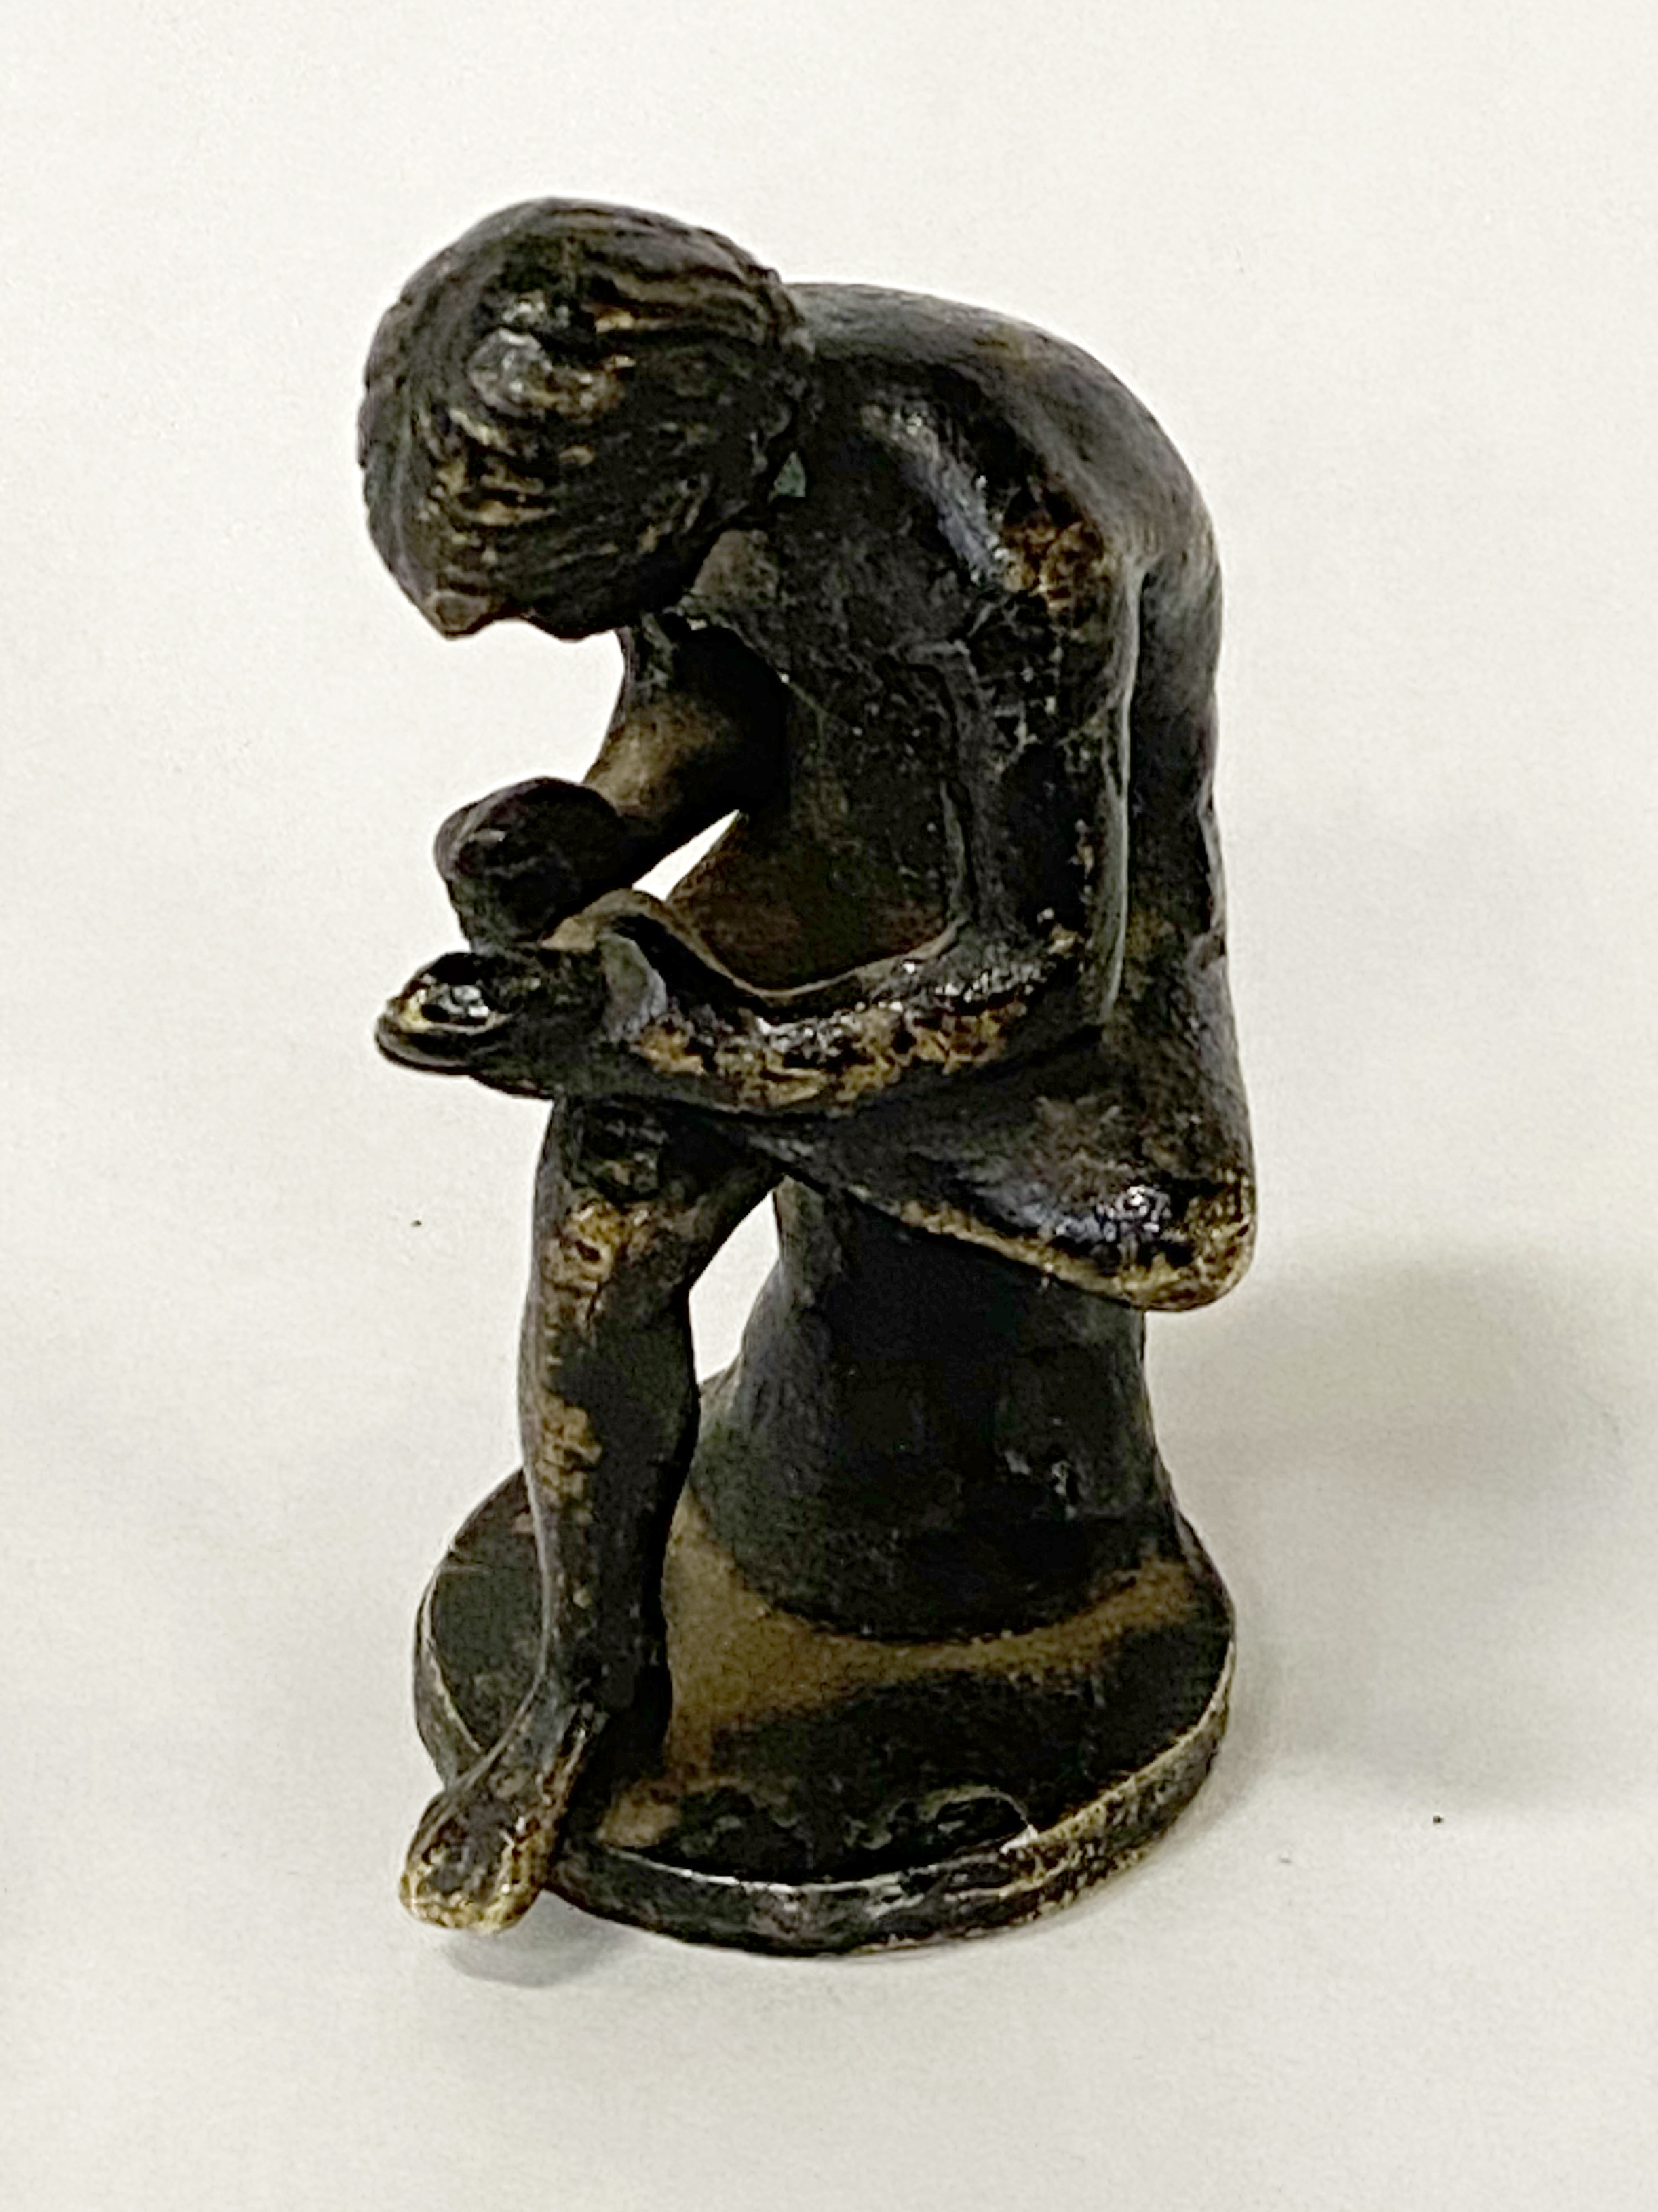 MINIATURE BOY WITH THORN CAST IN BRONZE 6.5CMS TALL THOUGHT TO BE SPINARIO CIRCA 18TH CENTURY